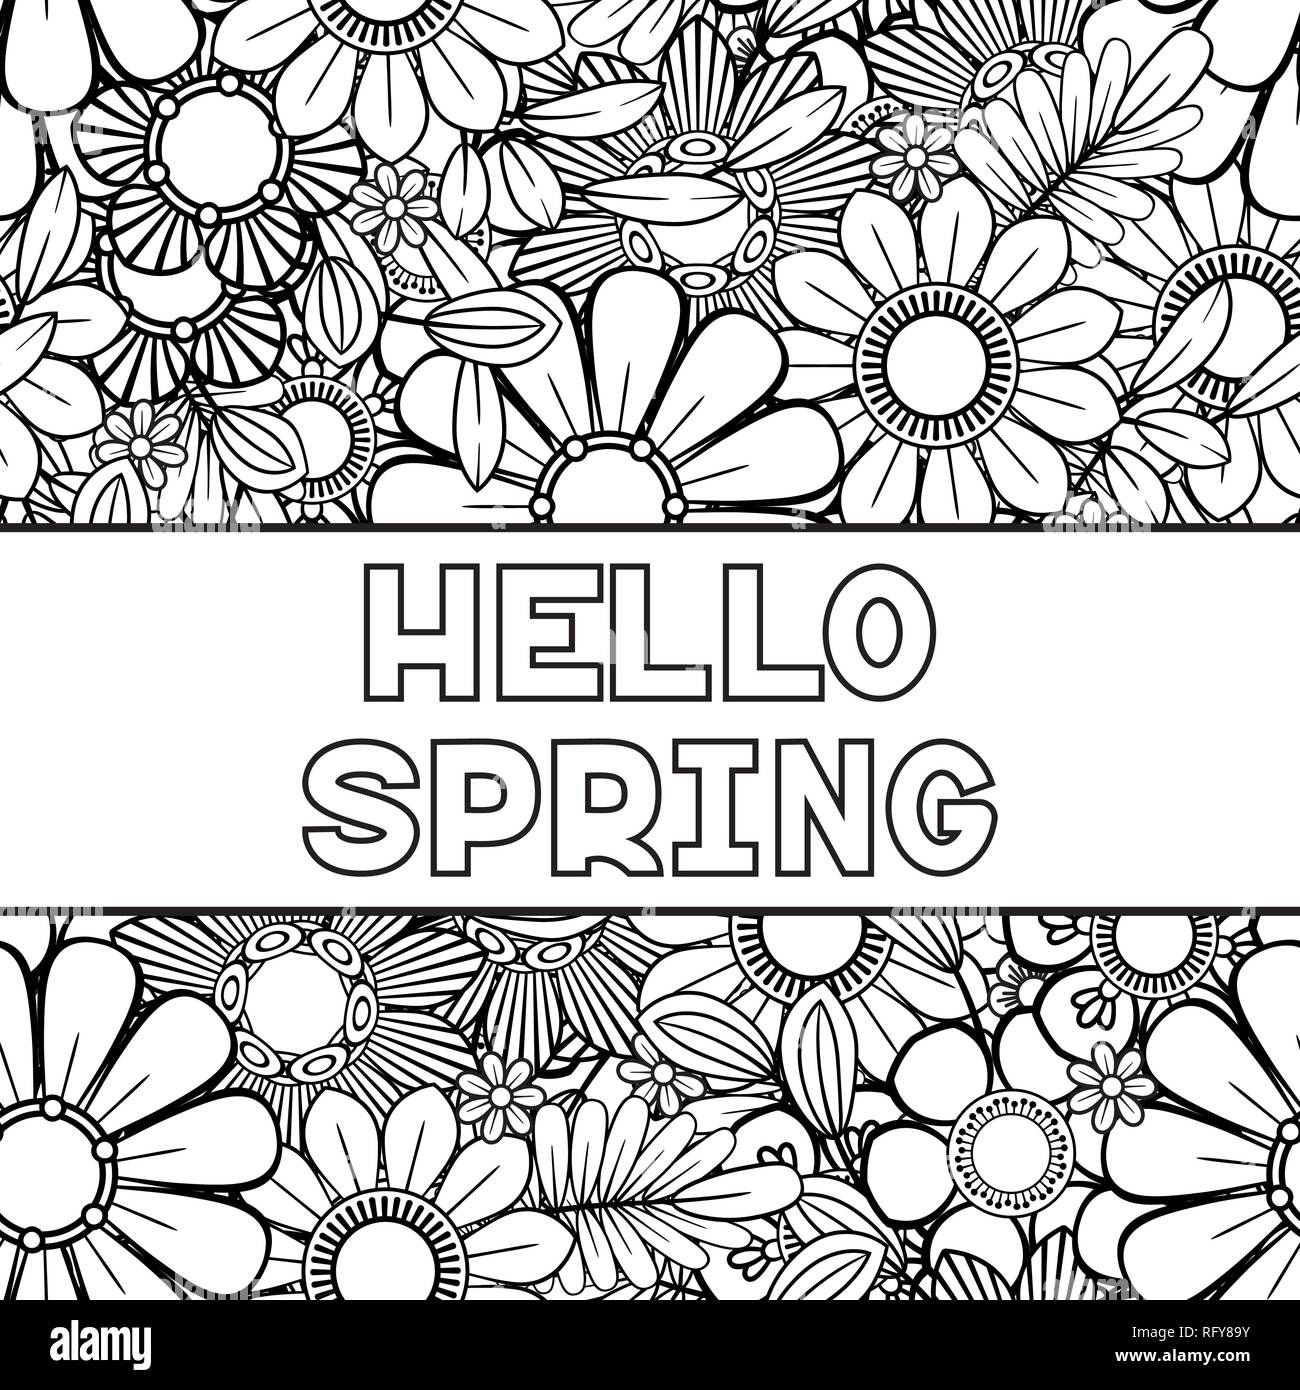 Hello spring coloring page with beautiful flowers black and white vector illustration greeting card template isolated on white background stock vector image art